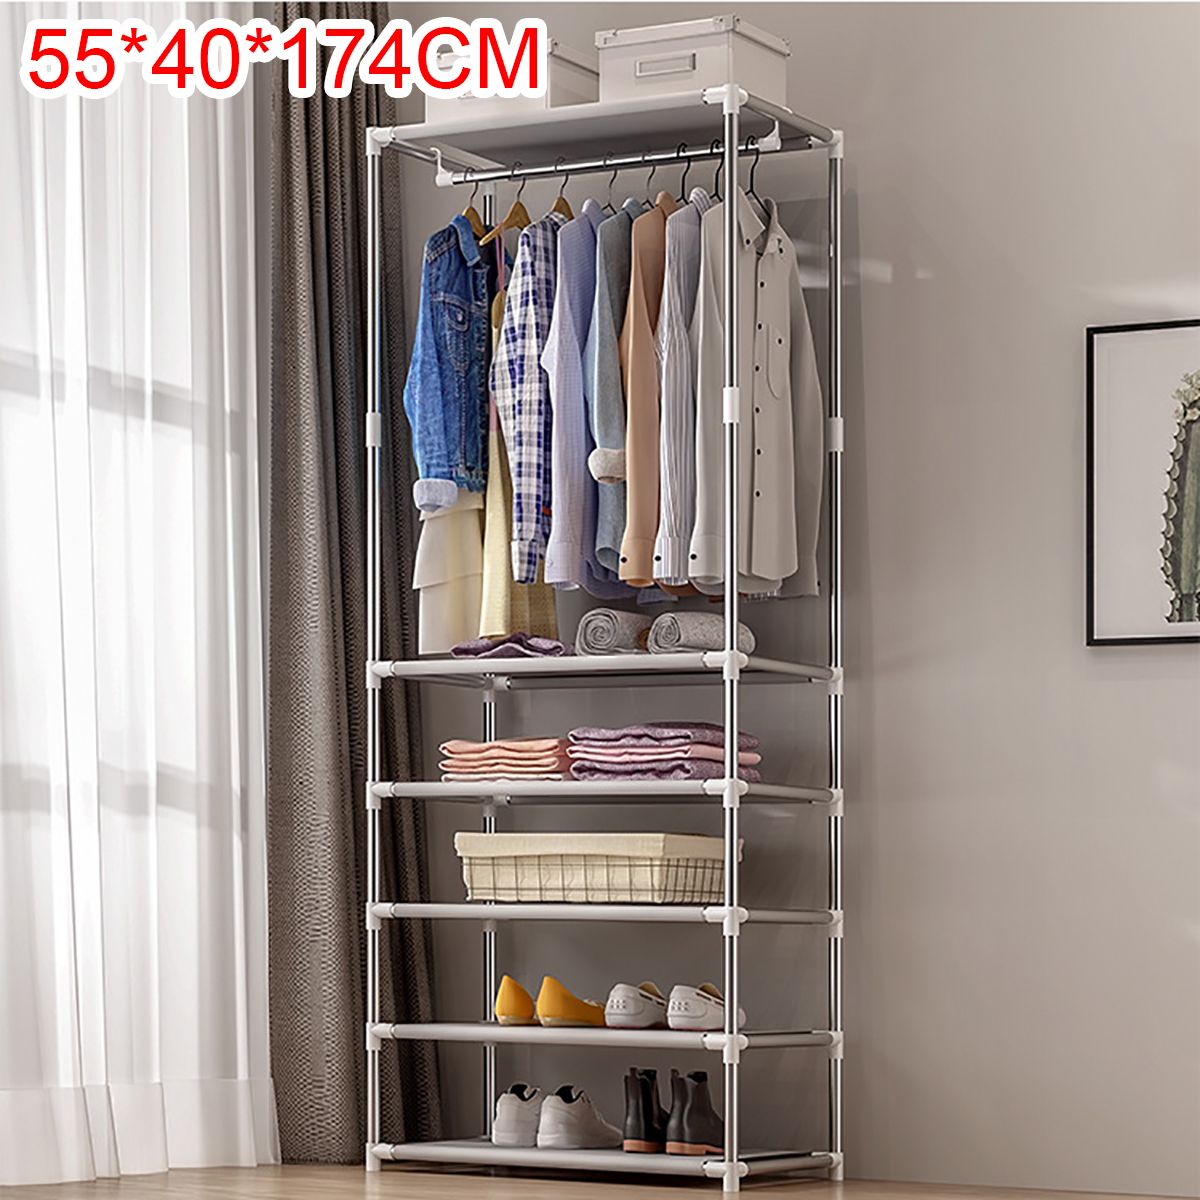 Simple Coat Rack Floor Clothes Hangers Creative Clothing Rack Shelf Easy Assembly Bedroom Hanging Clothing Racks Fashion Home Decorations 44